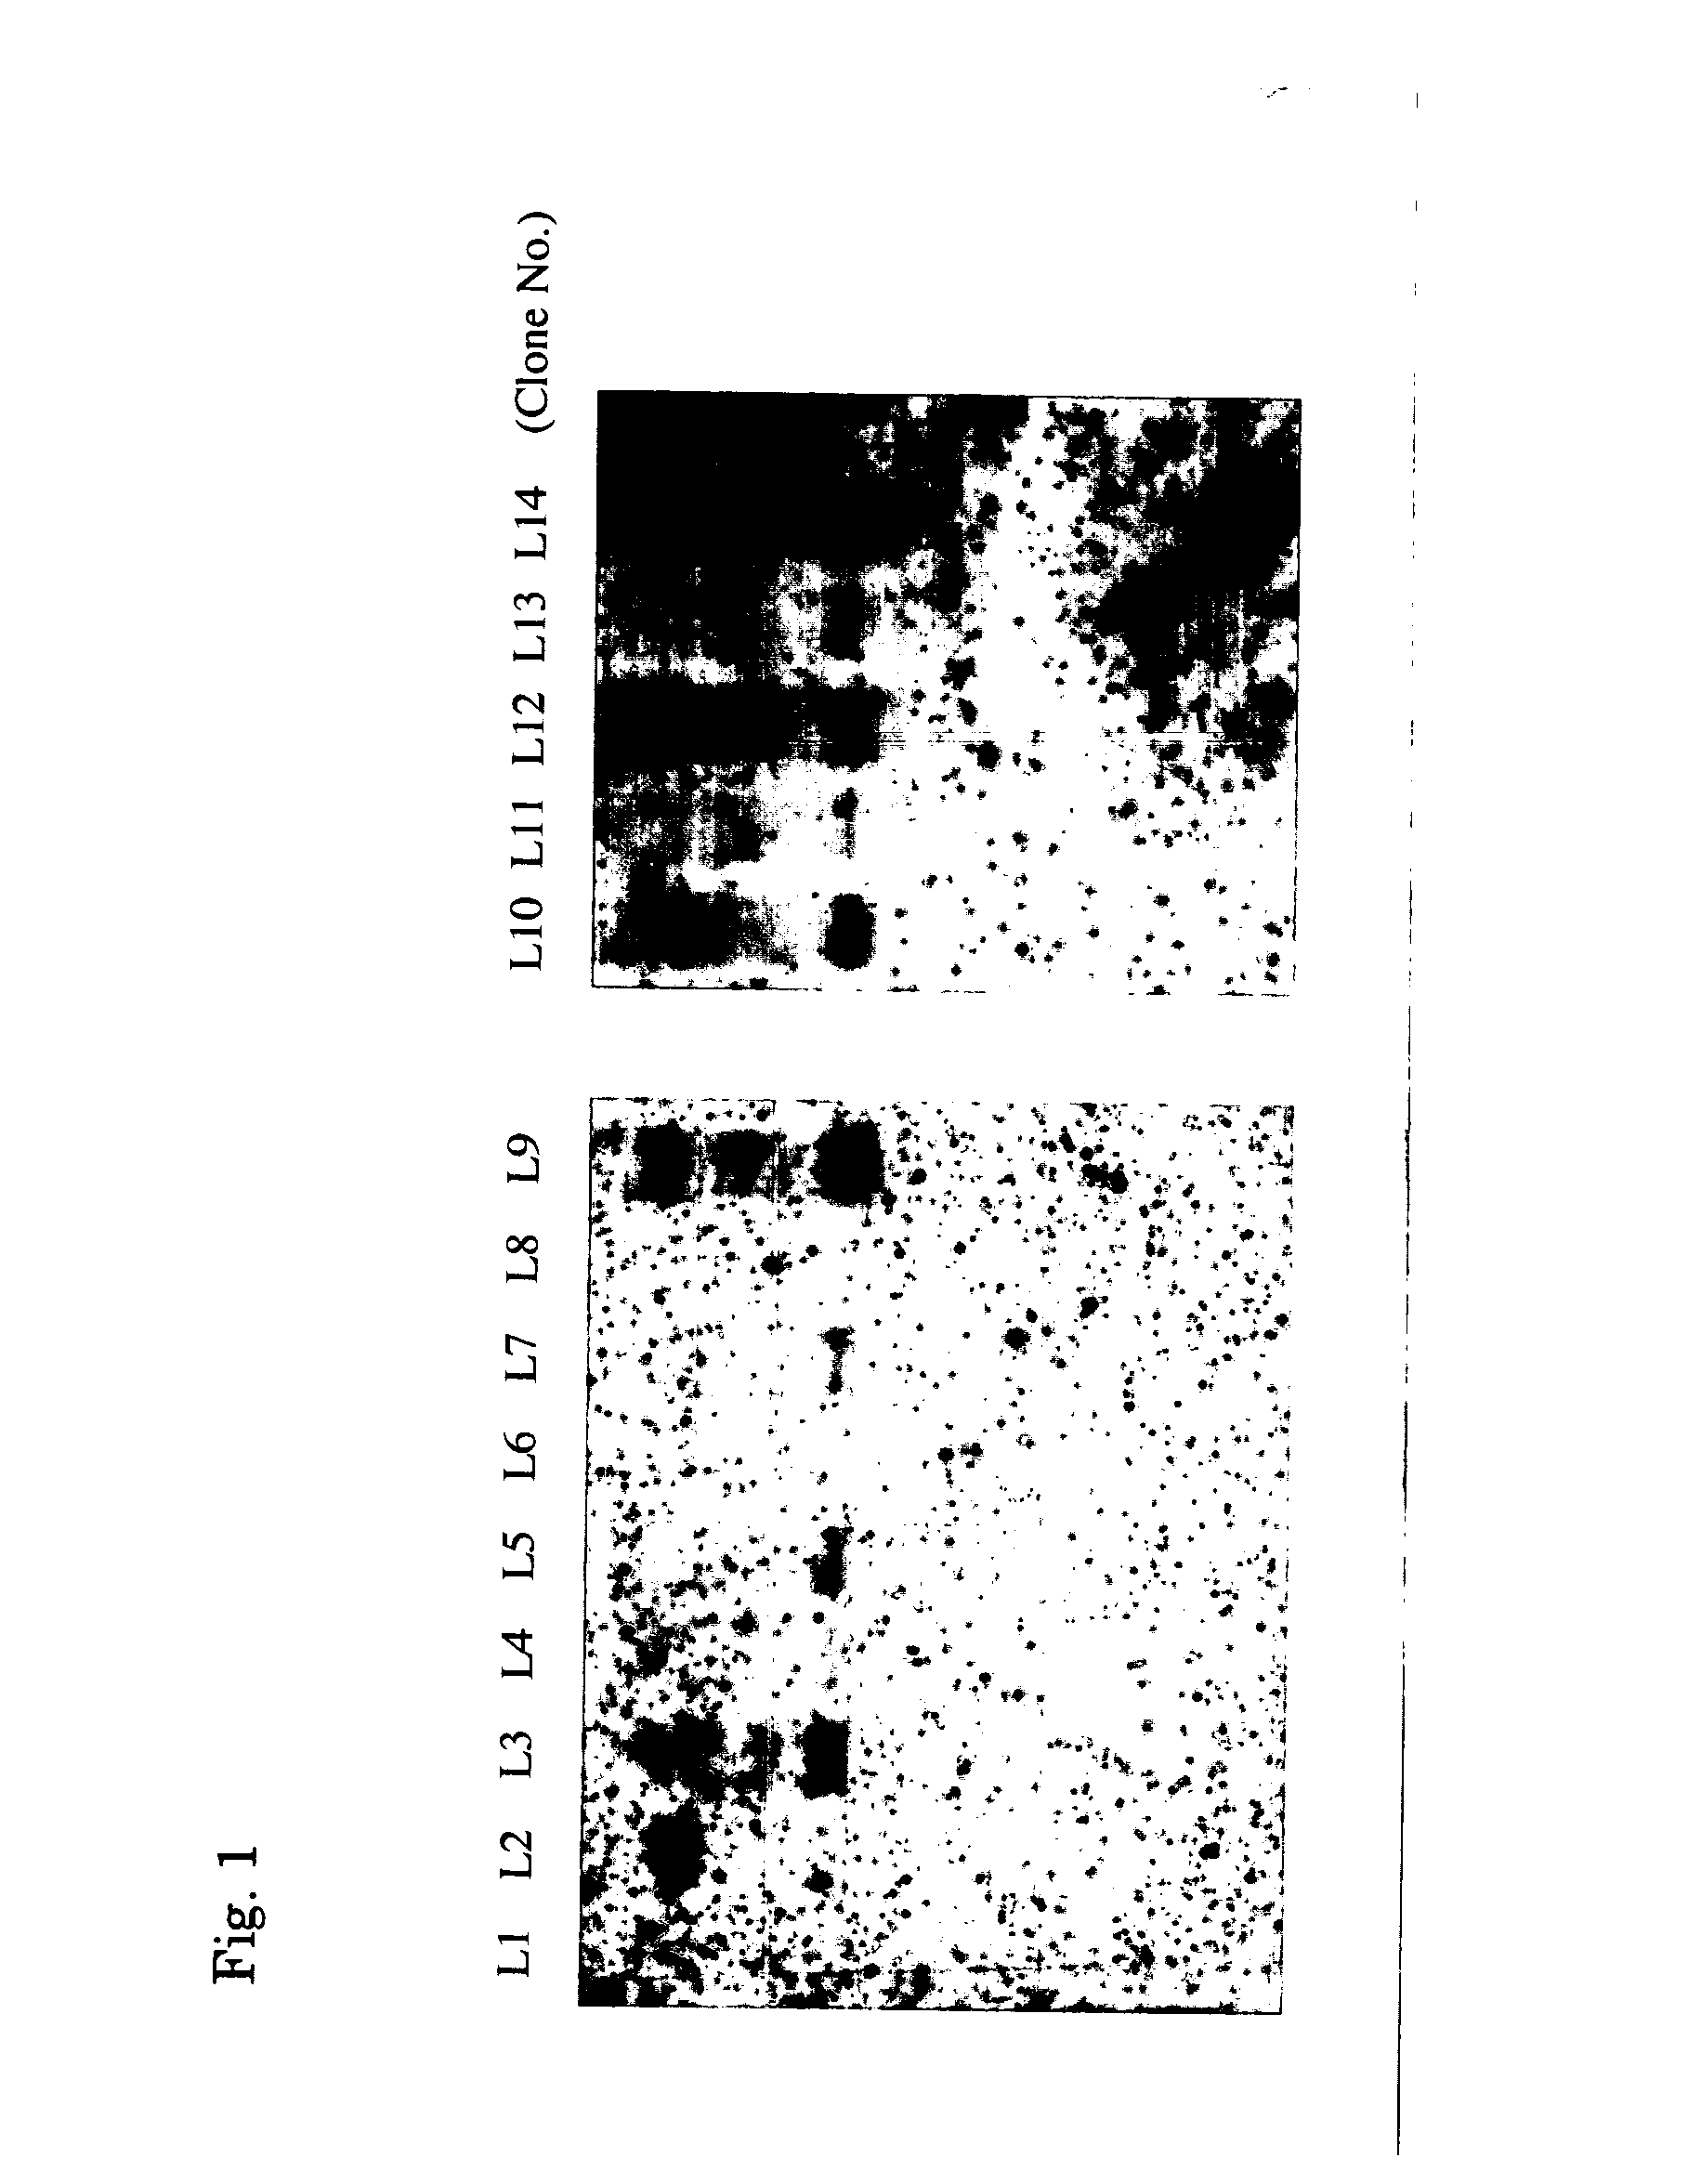 Cells to be used in producing virus vector, process for producing the same, and process for producing virus vector with the use of the cells